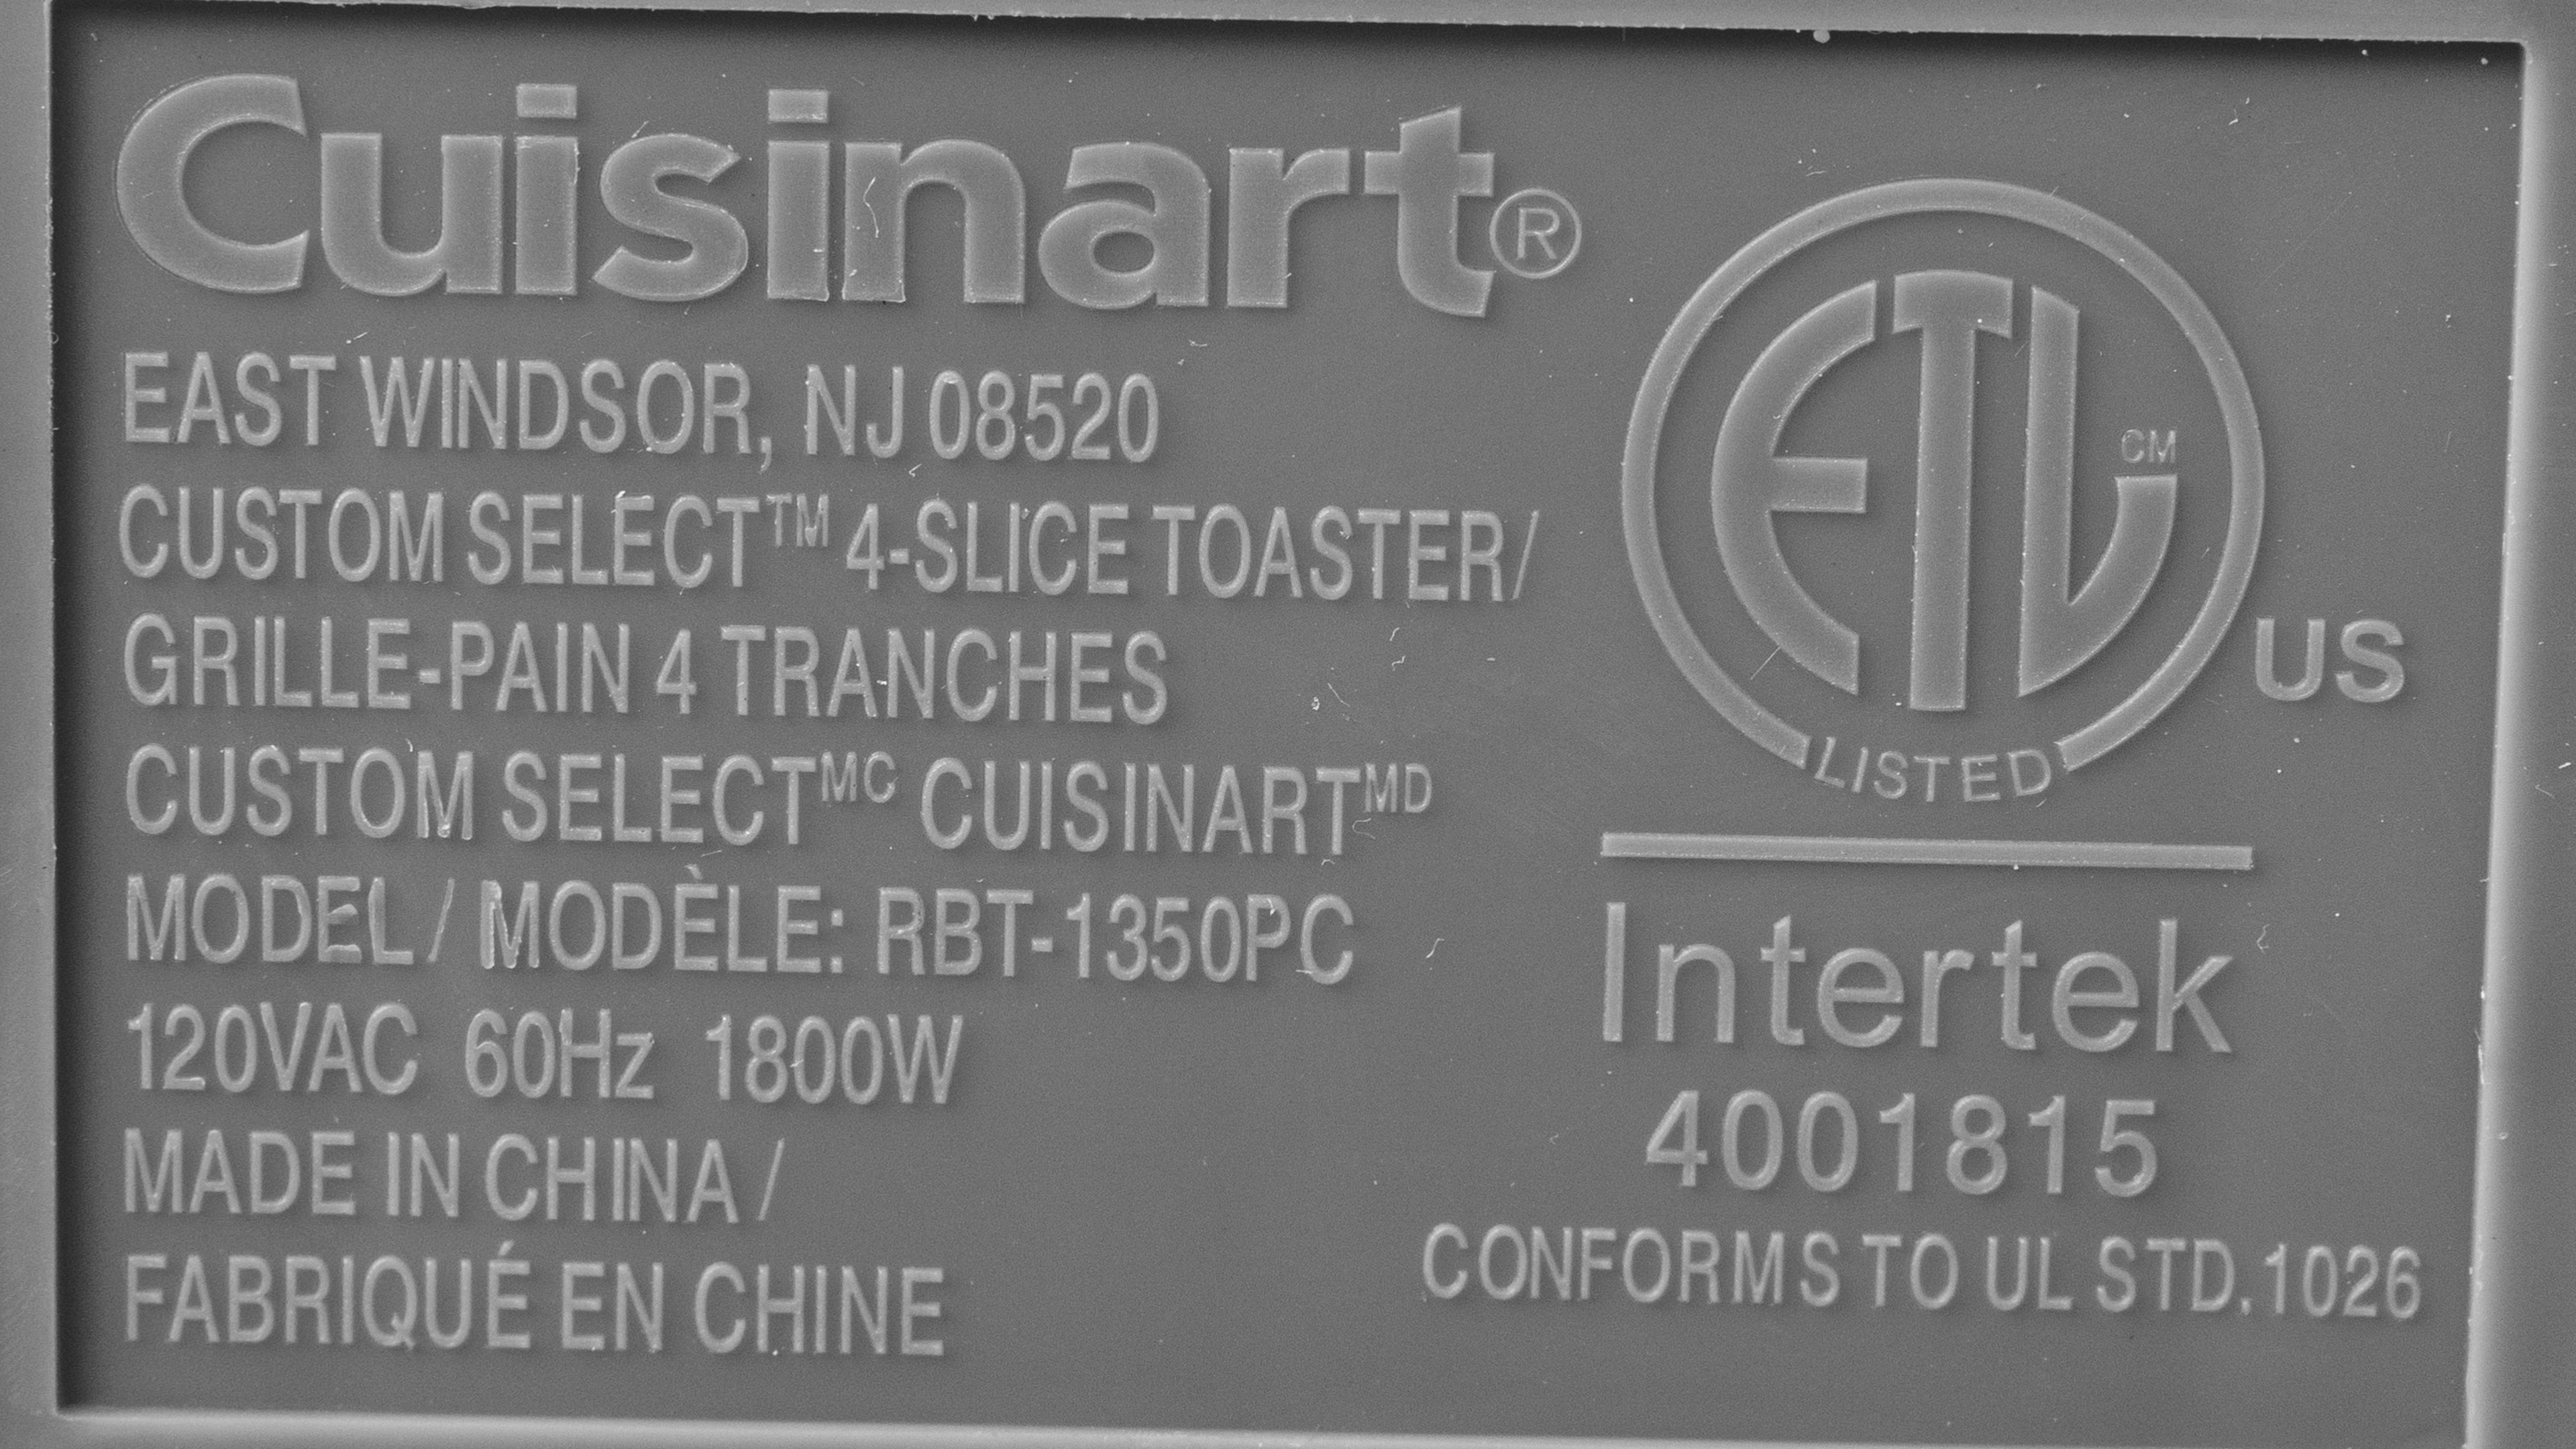 https://www.rtings.com/assets/products/OHq9sc6J/cuisinart-custom-select-4-slice-toaster-rbt-1350pc/label-large.jpg